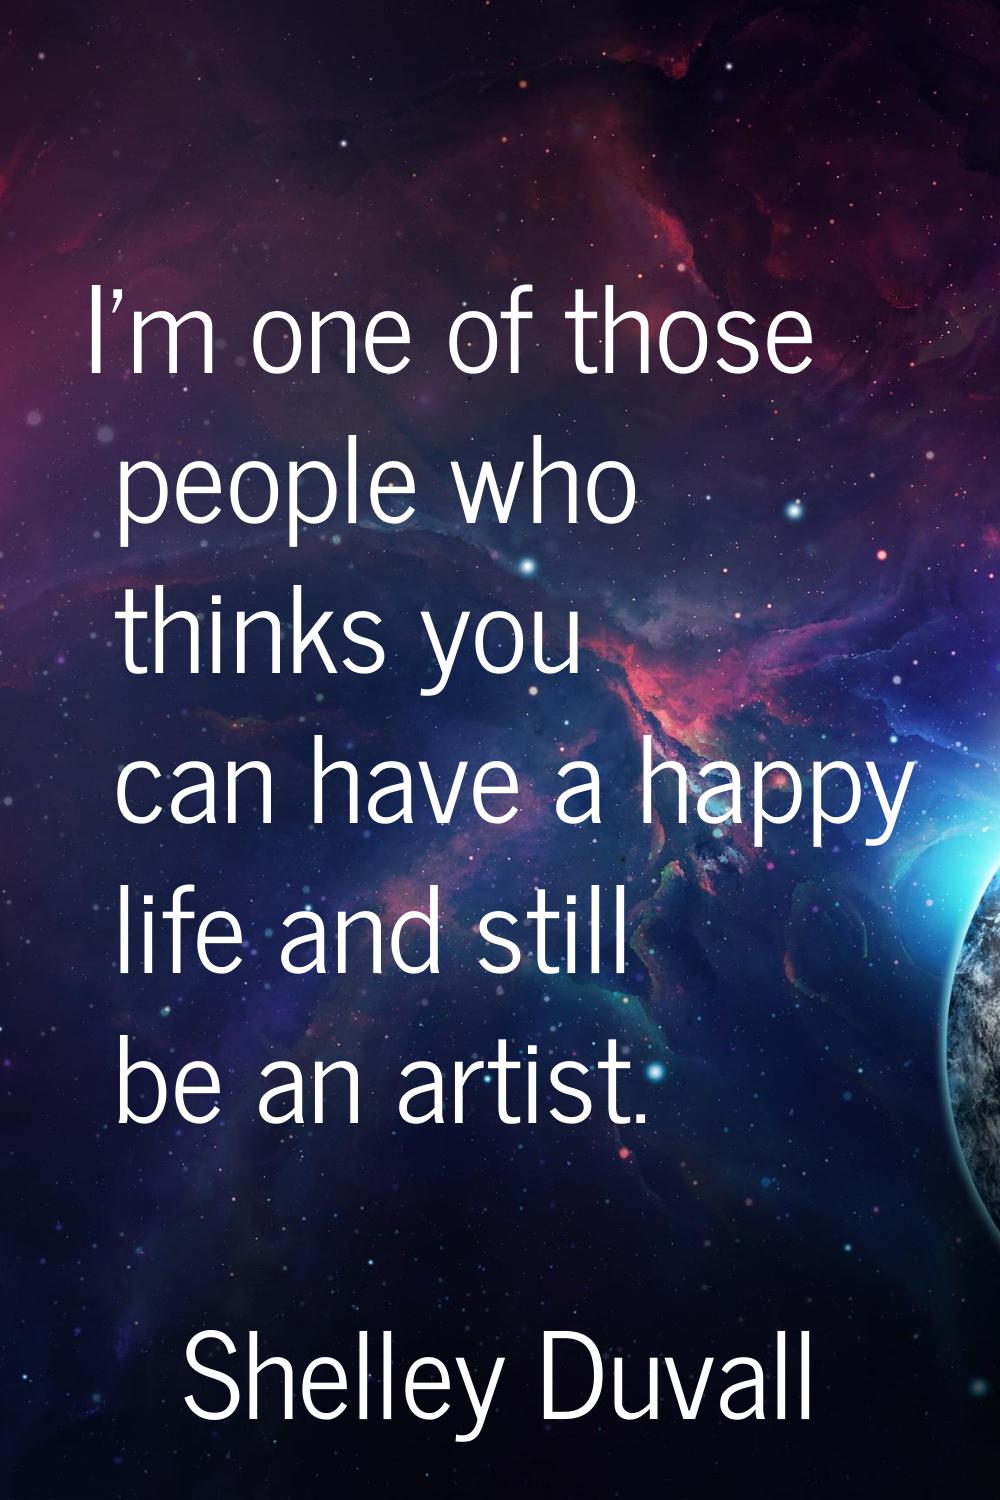 I'm one of those people who thinks you can have a happy life and still be an artist.